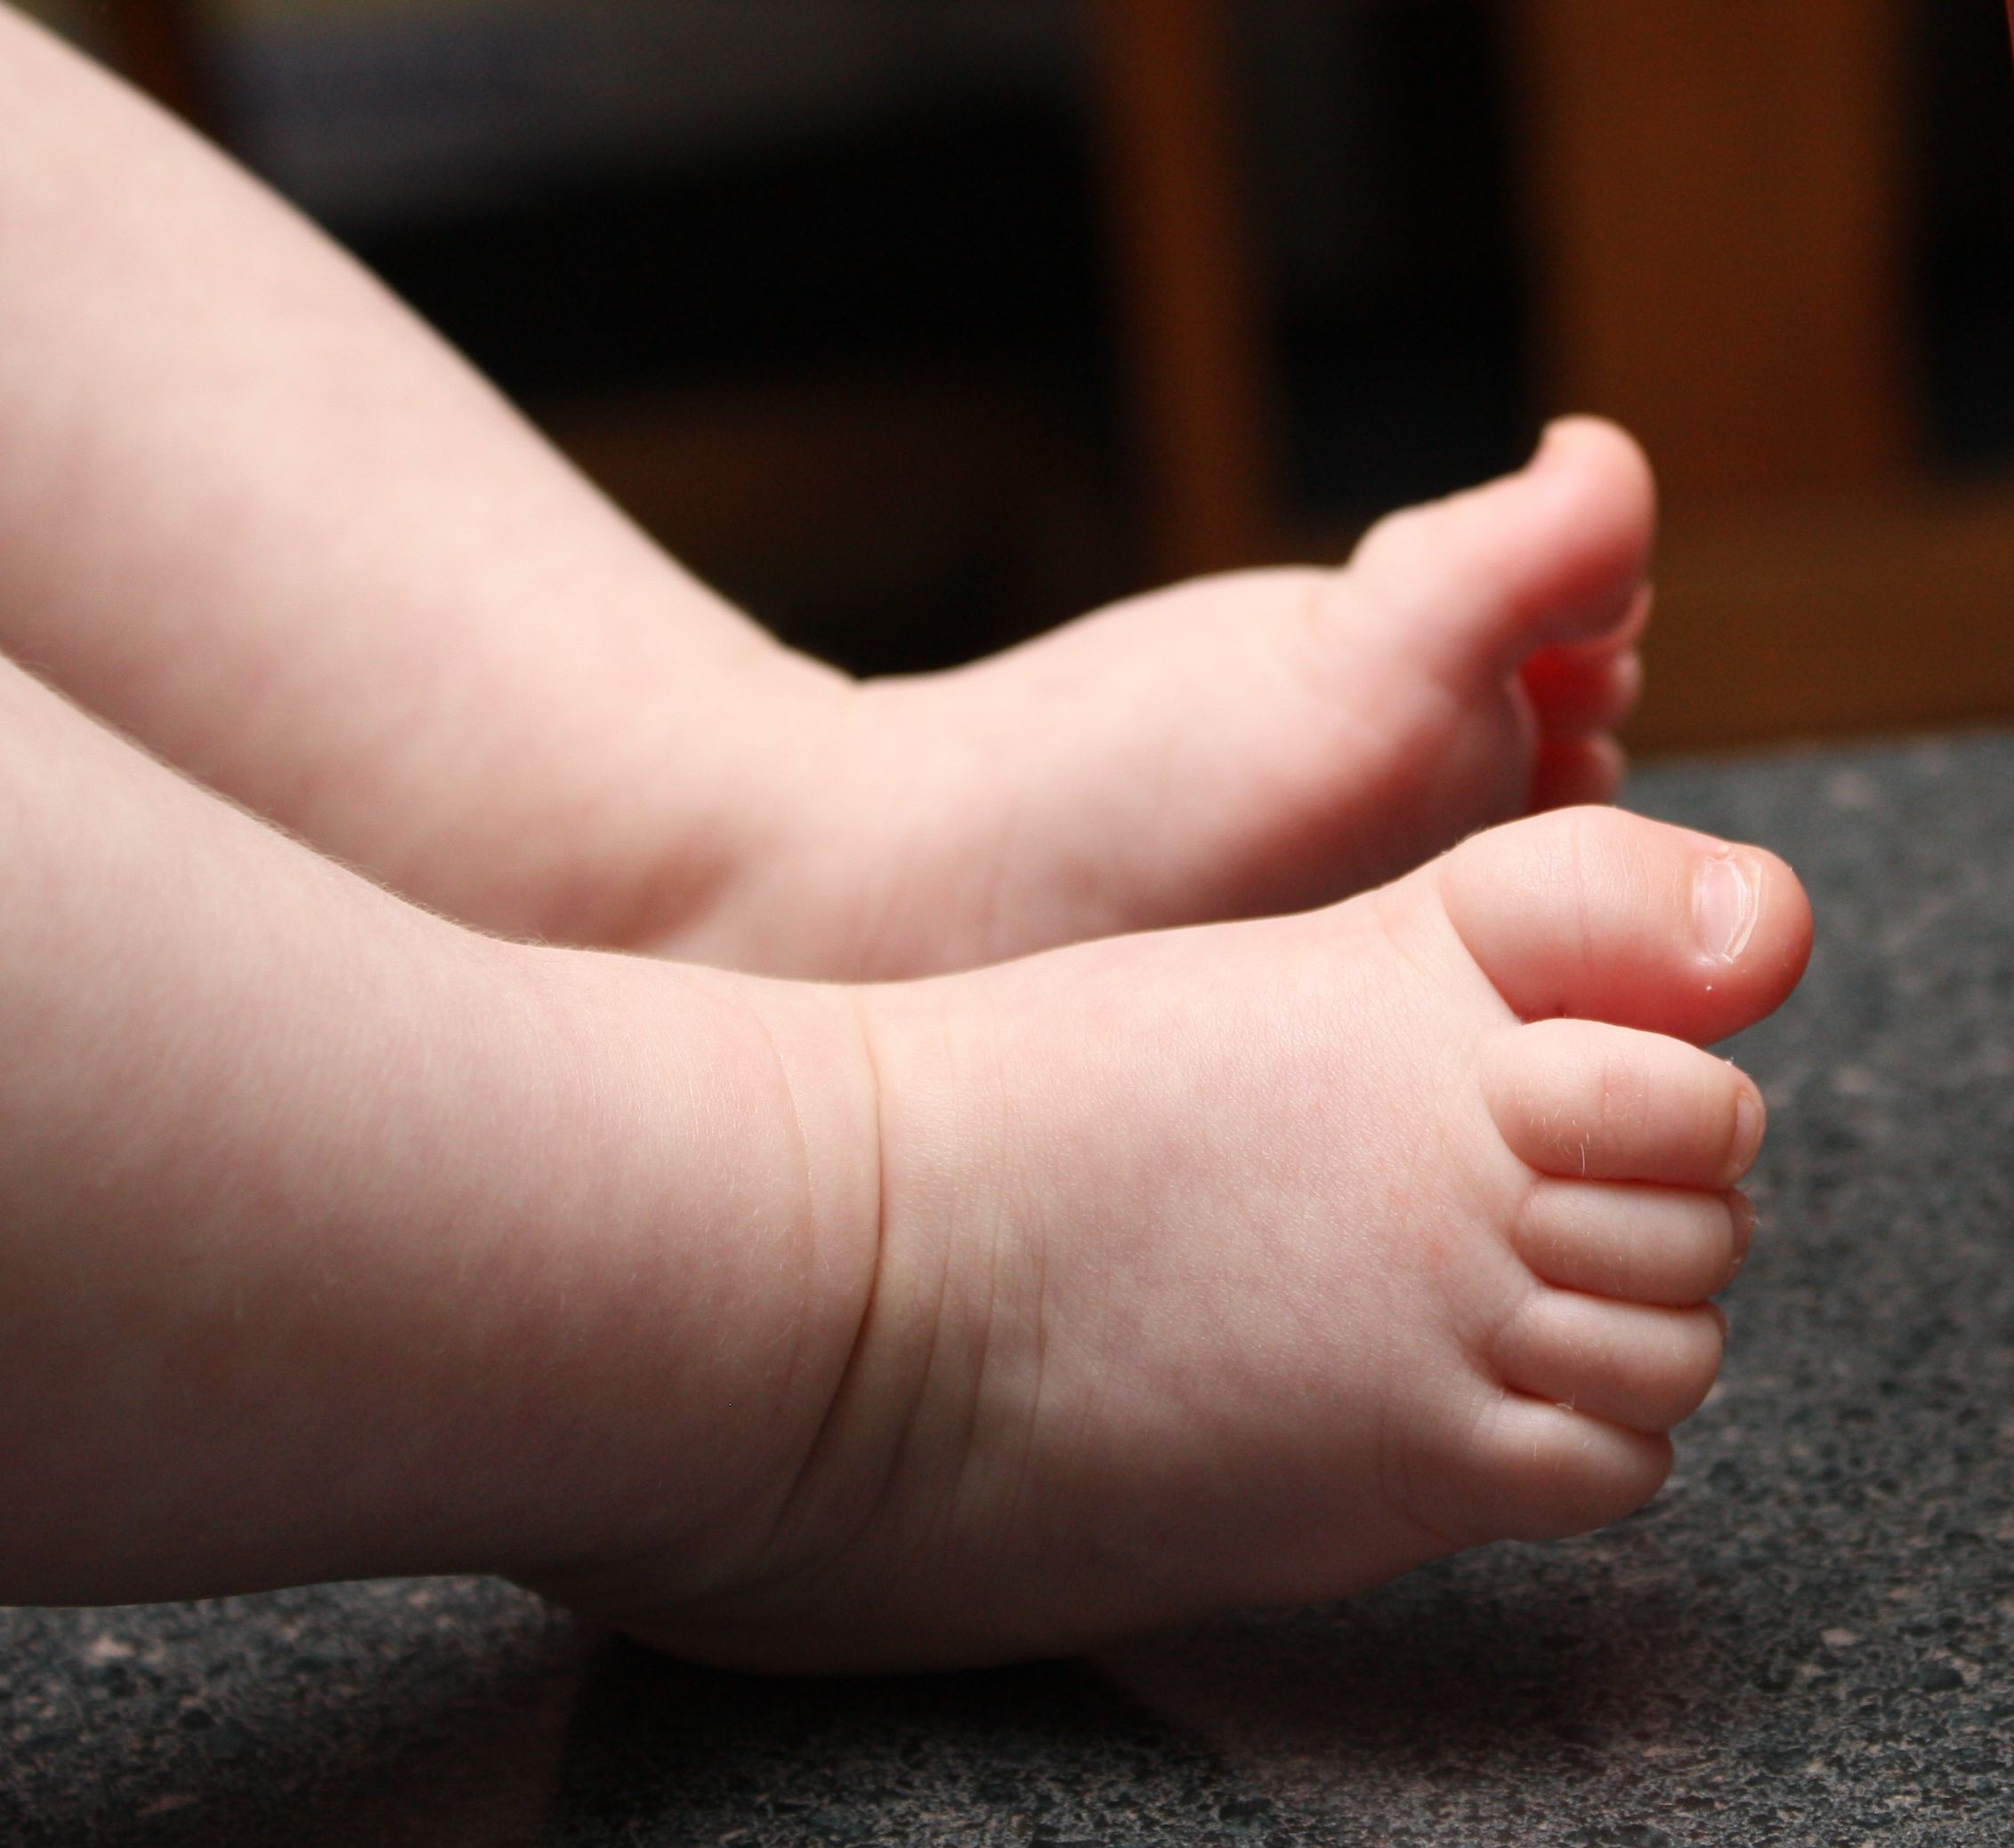 Baby Development Toes: A Guide to Understanding Your Baby’s Foot Development